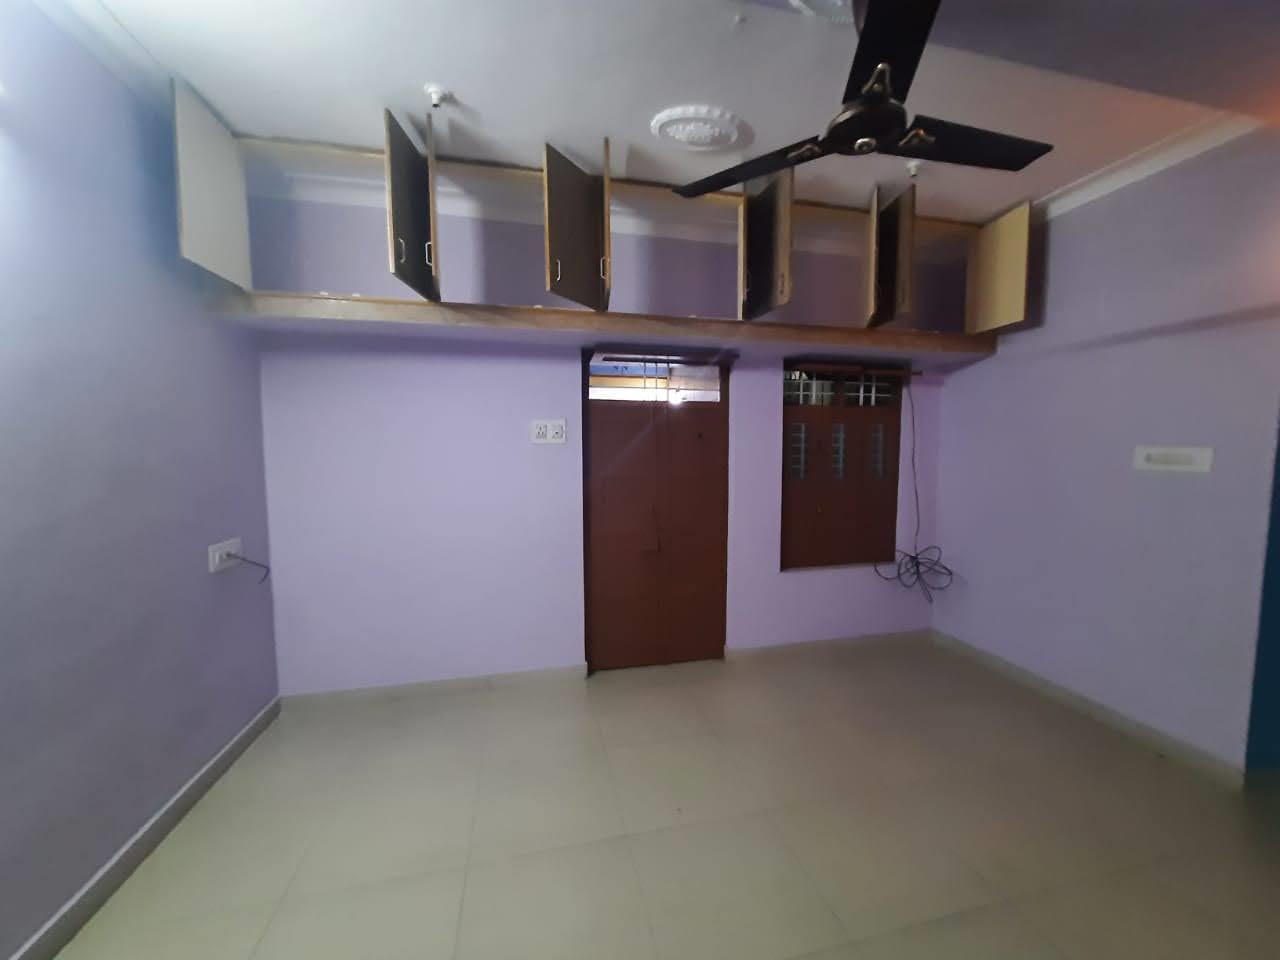 3 BHK Independent House for Lease Only at JAM-5553 in Ganga Nagar